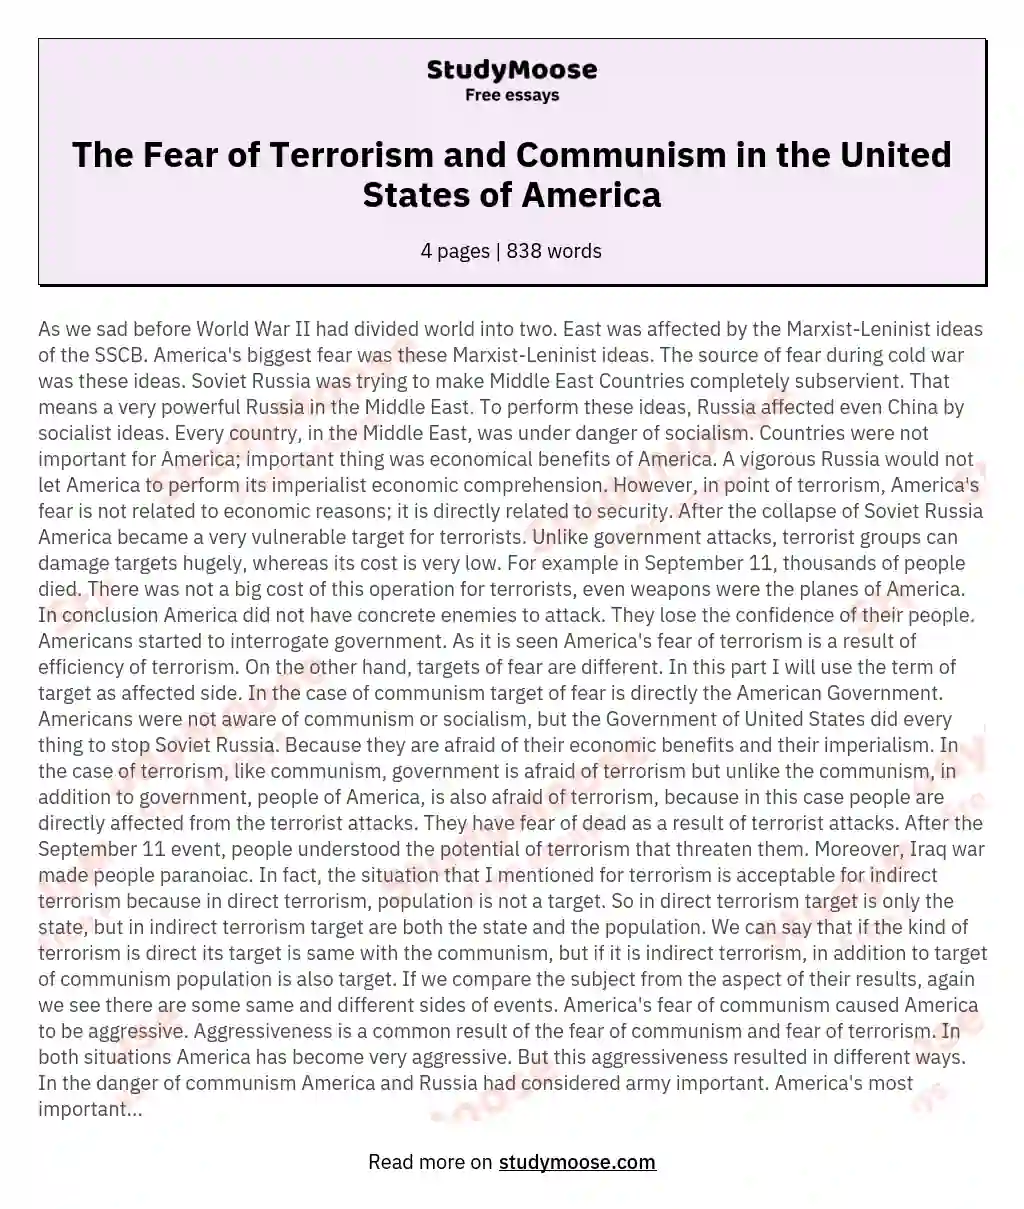 The Fear of Terrorism and Communism in the United States of America essay